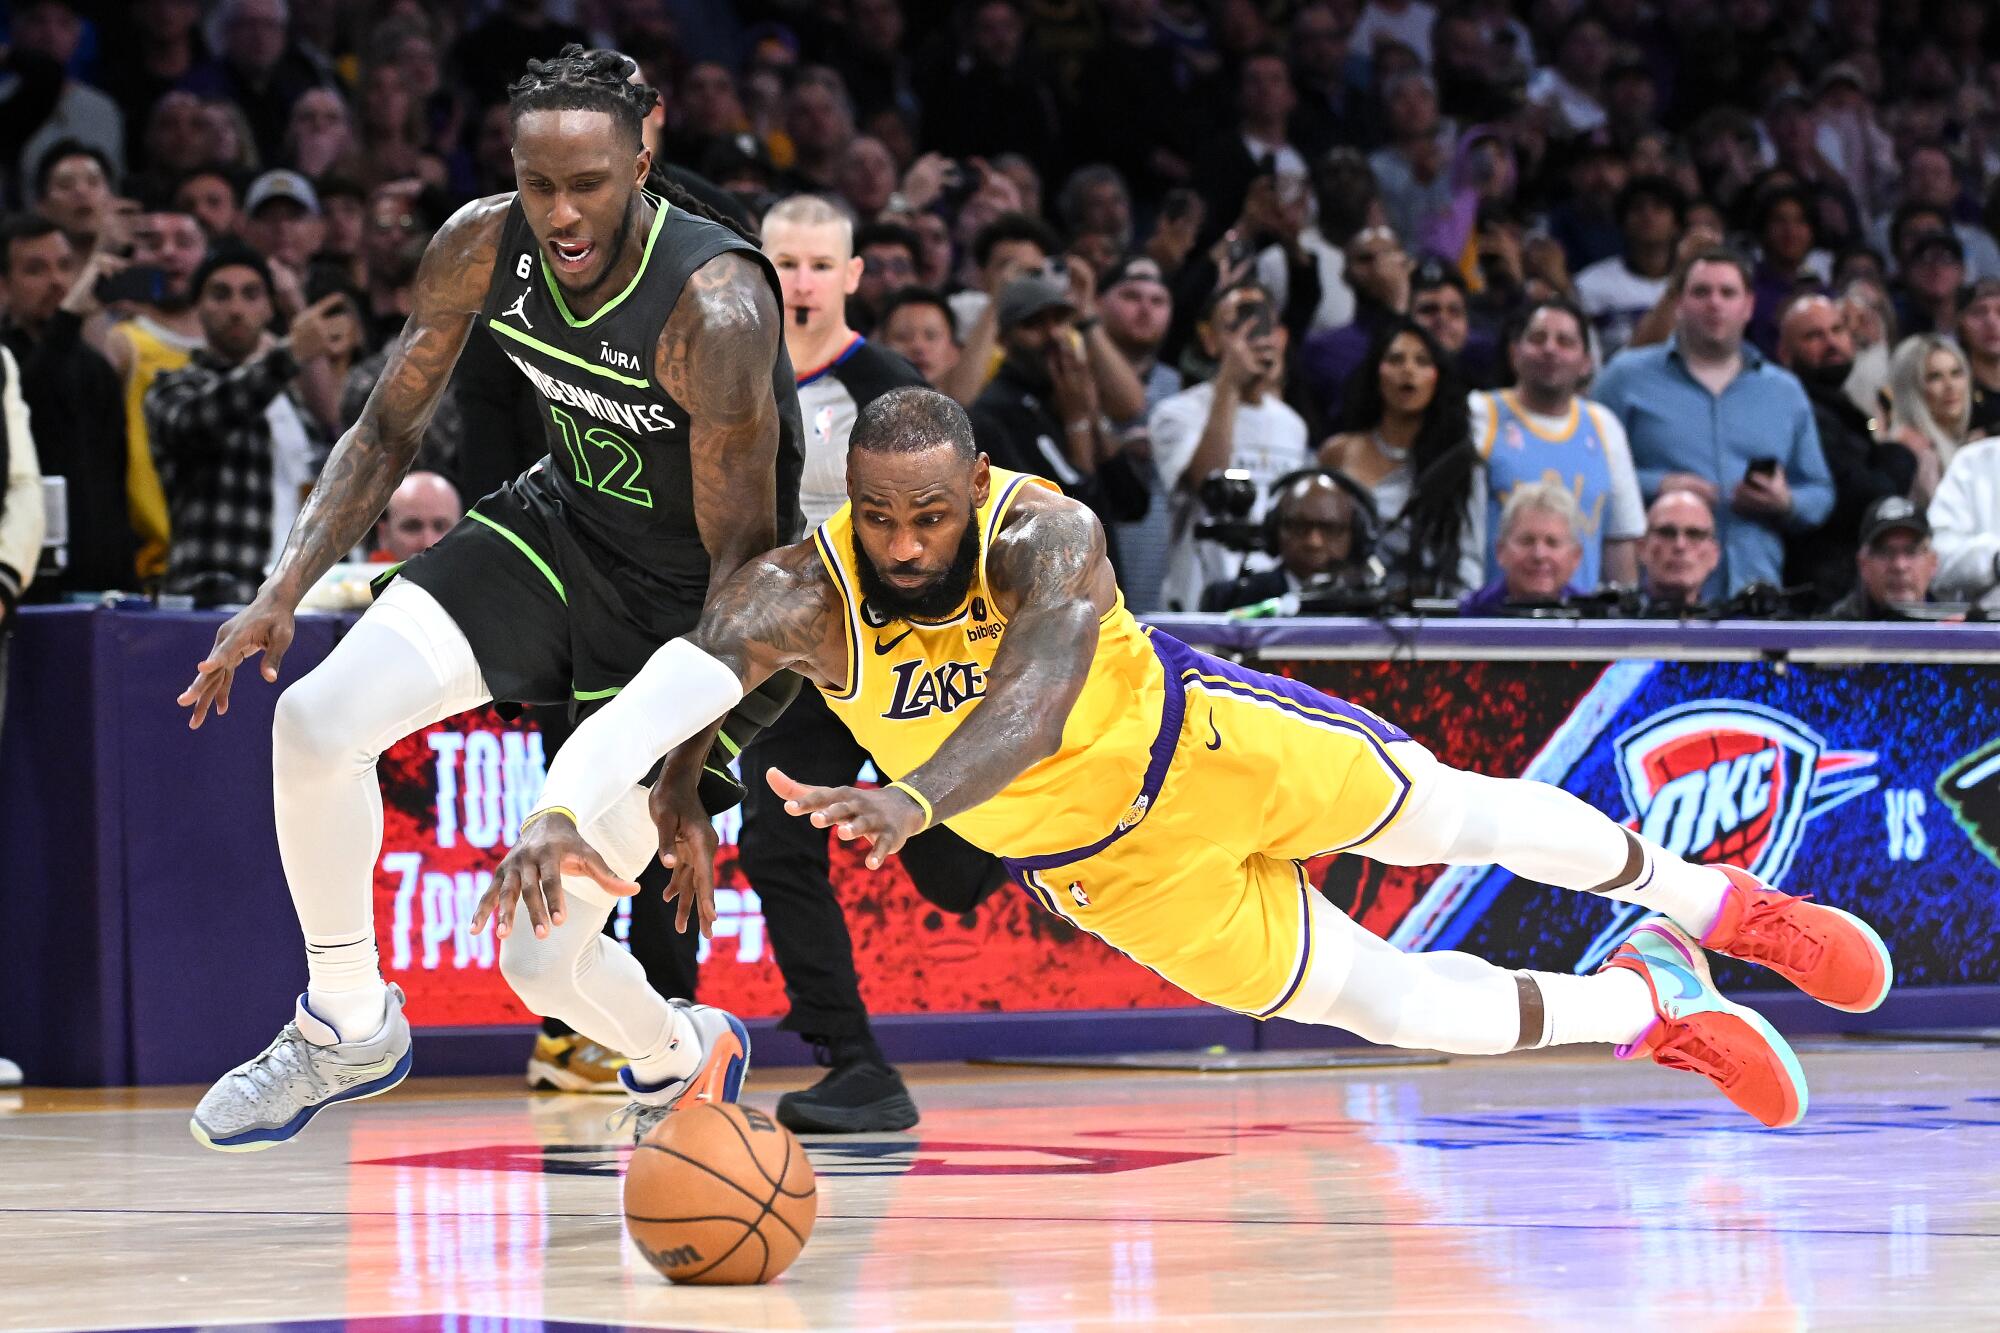 Lakers forward LeBron James dives for the ball in front of Timberwolves forward Taurean Prince